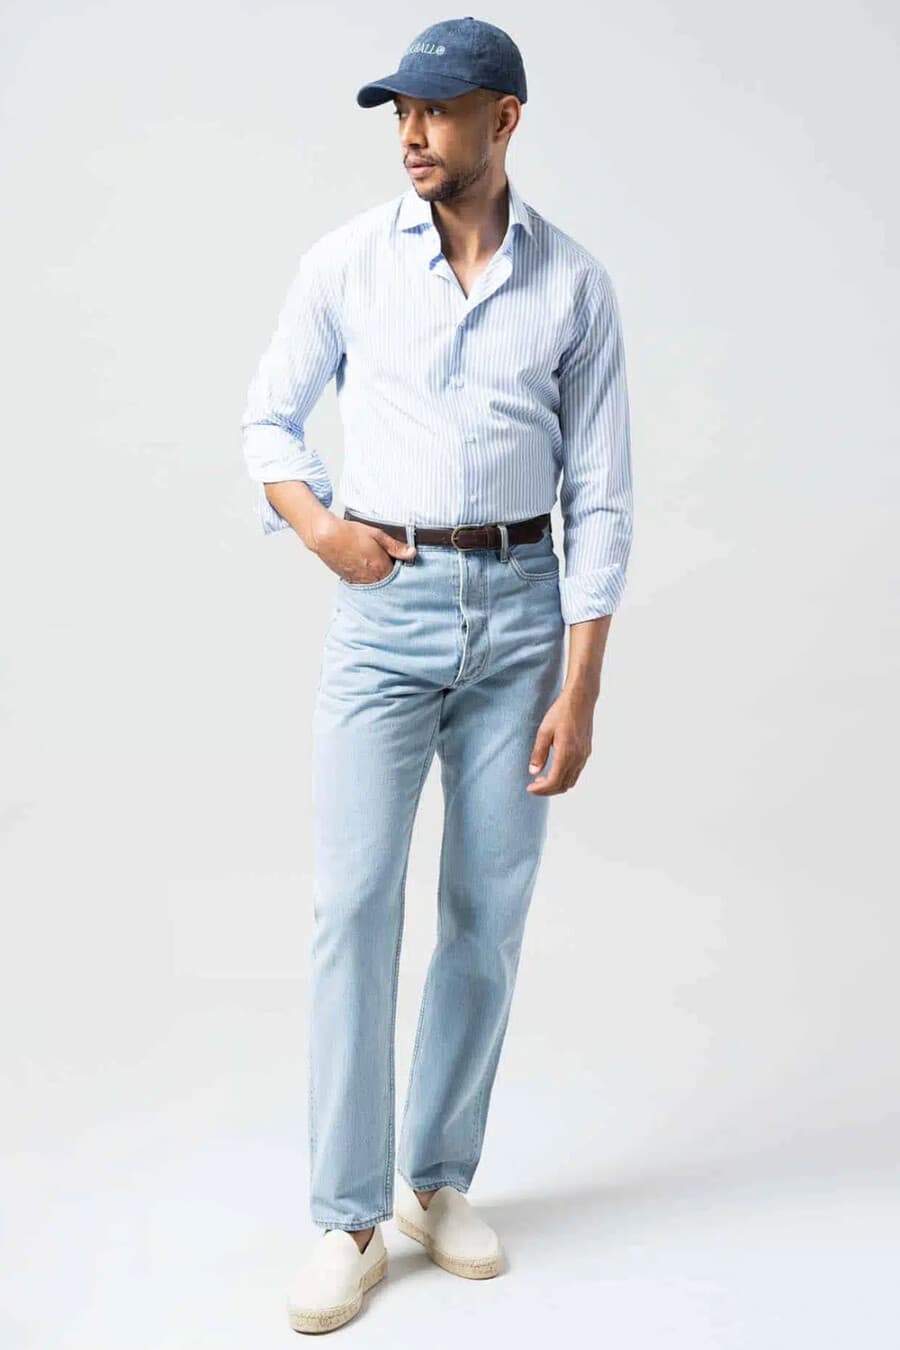 Men's light wash jeans, tucked in pale blue striped shirt, brown leather belt, white espadrilles and dark blue baseball cap outfit